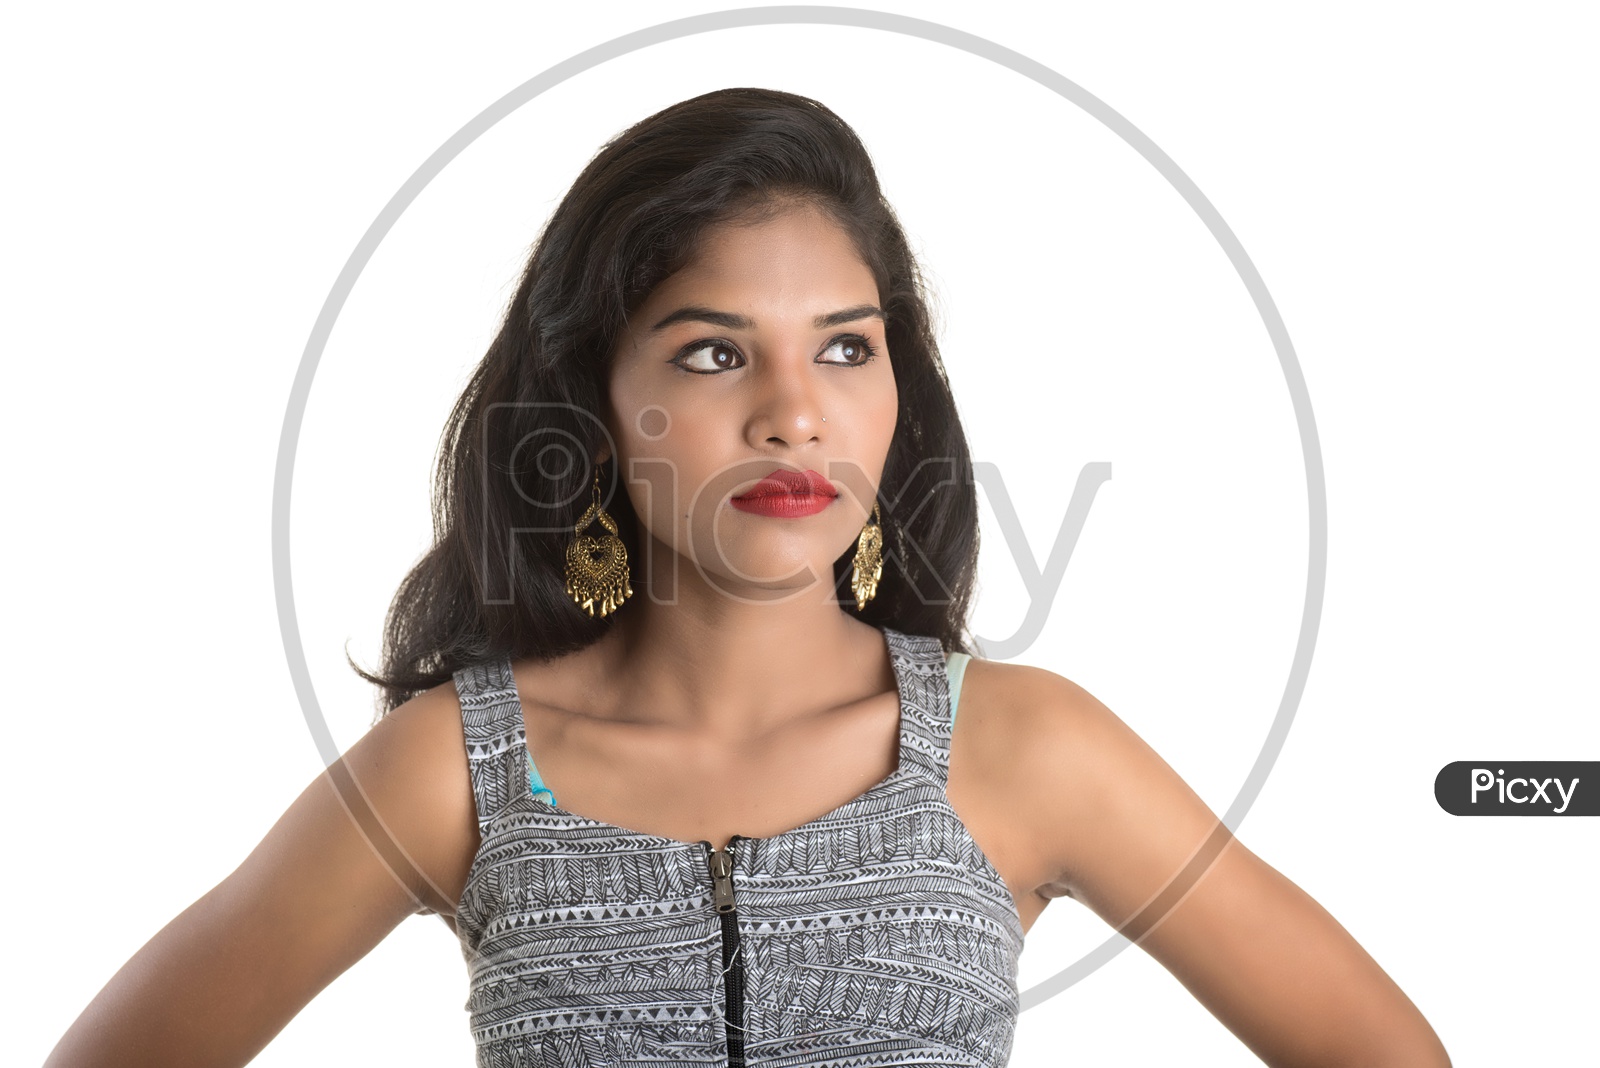 Portrait Of a Pretty Young Girl Posing On an Isolated White Background